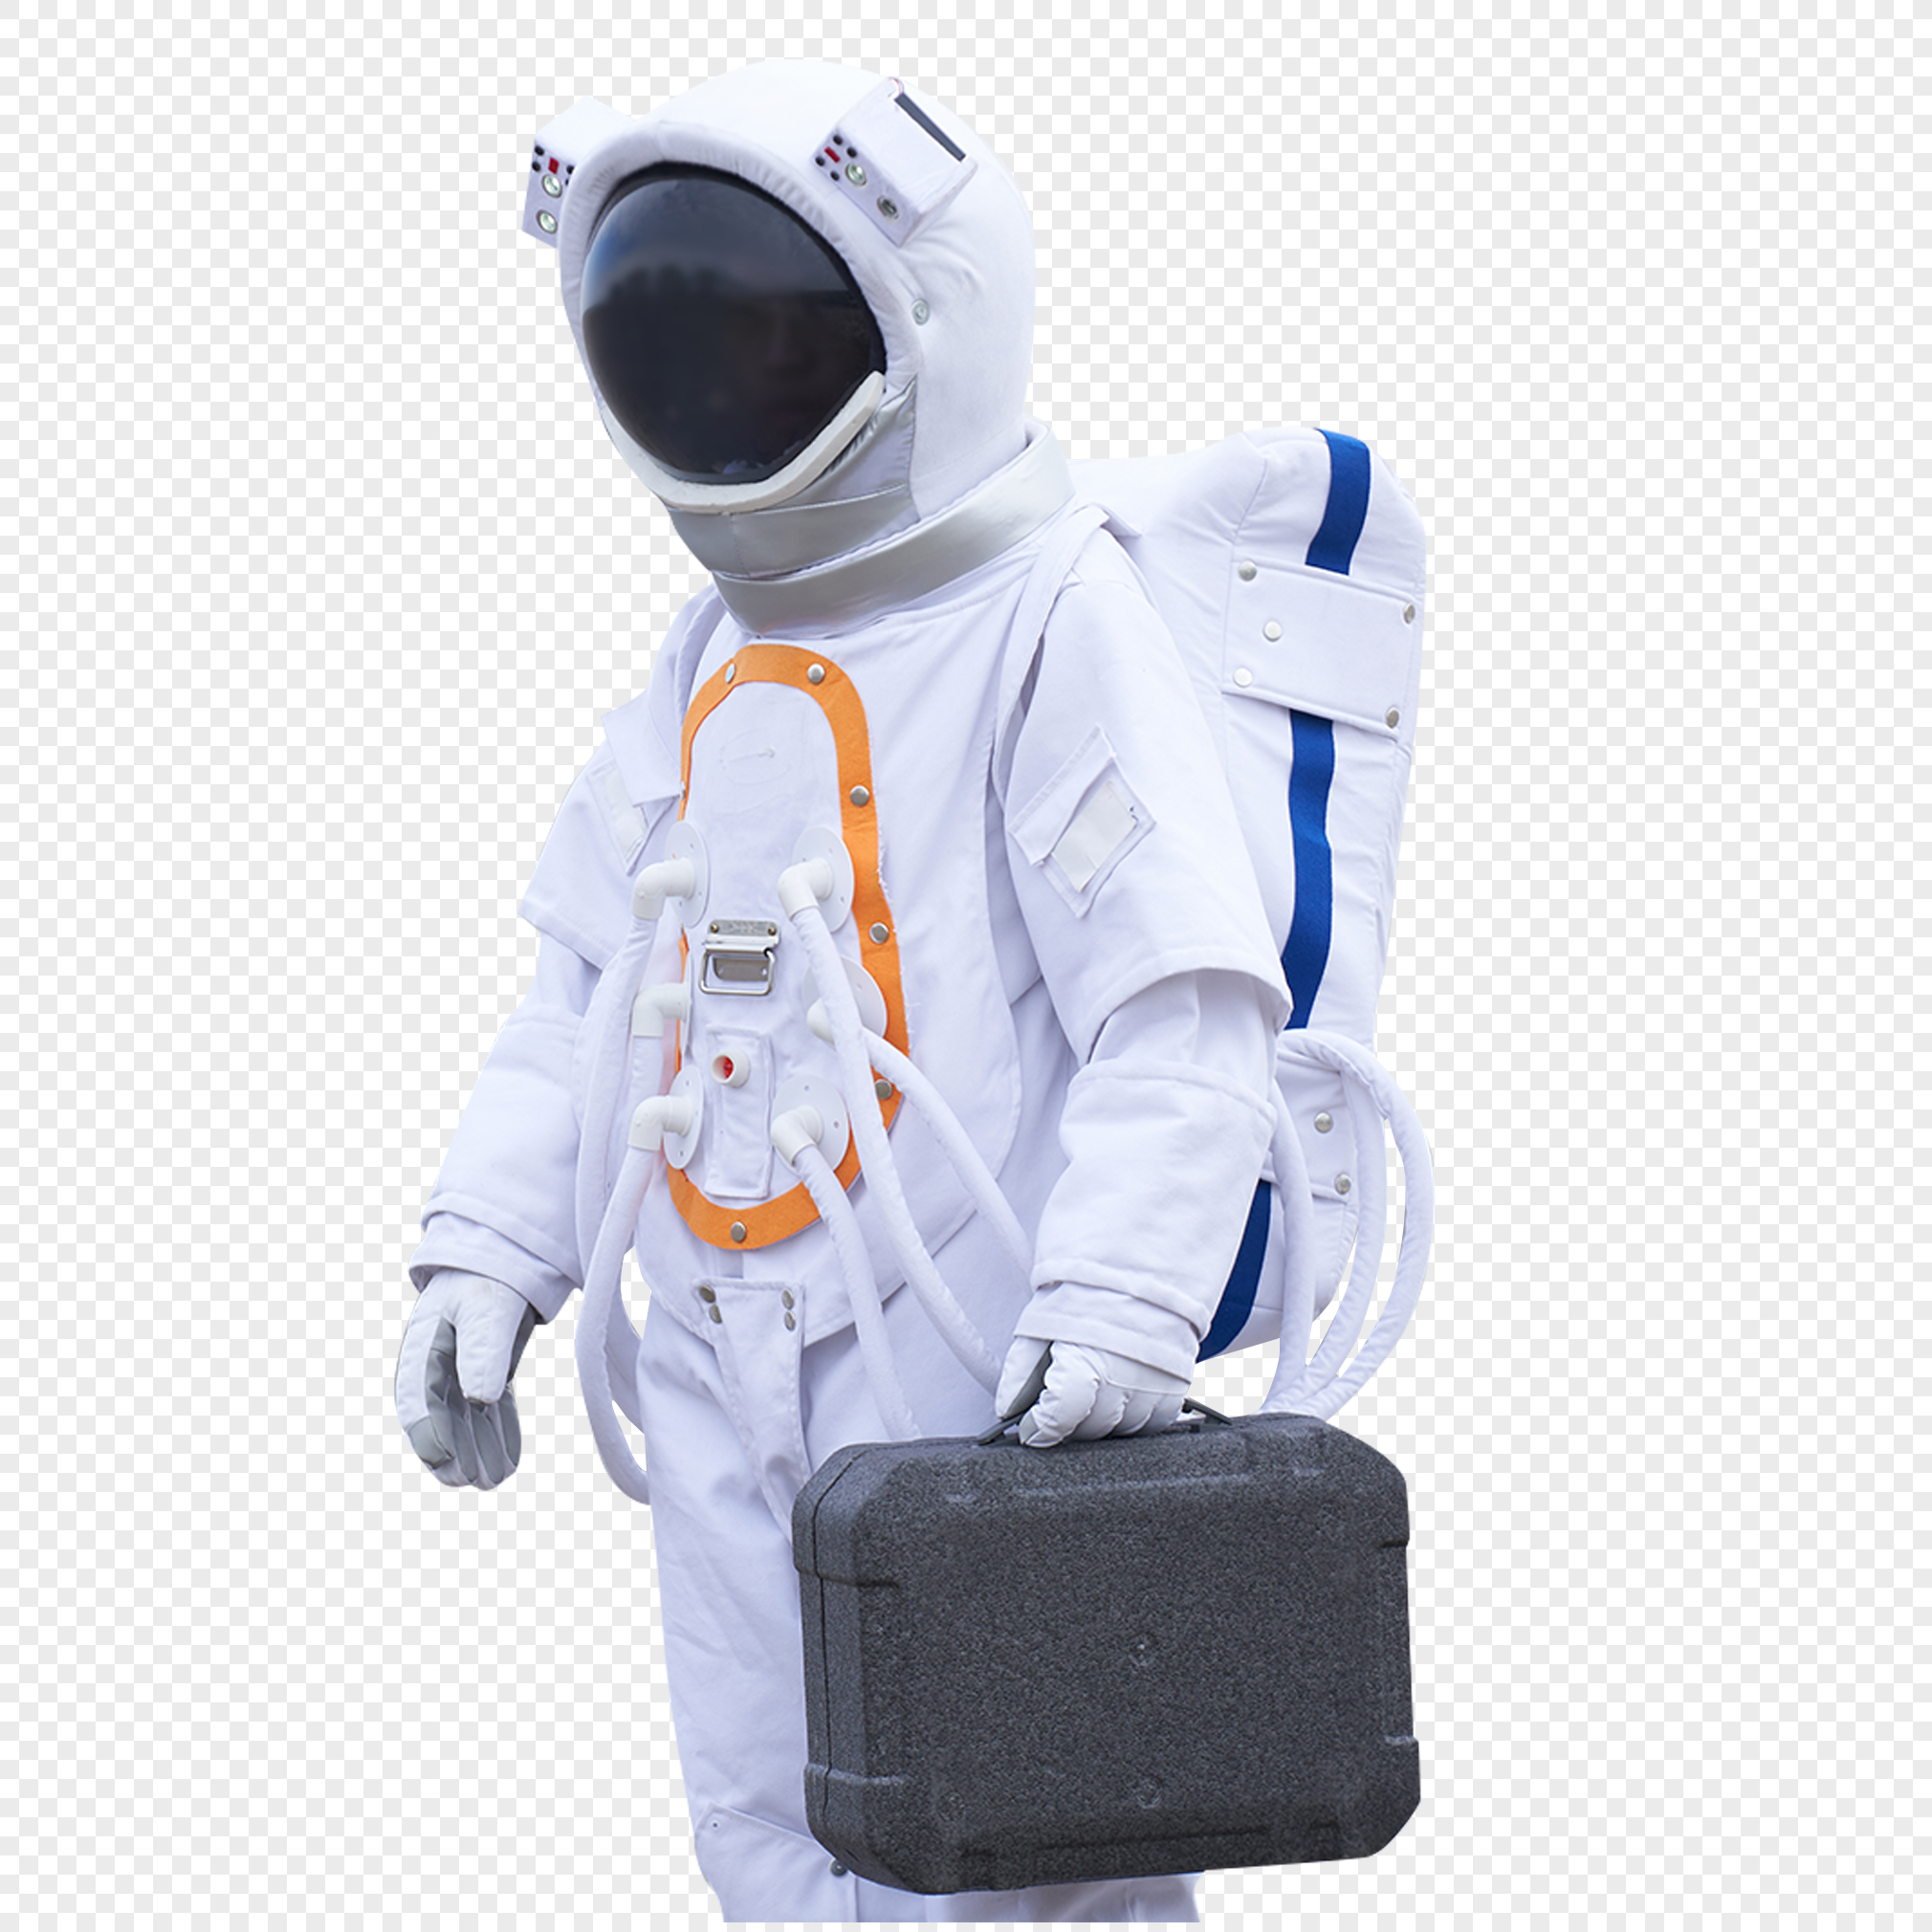 Man In Space Suit Holding Suitcase PNG Hd Transparent Image And Clipart ...